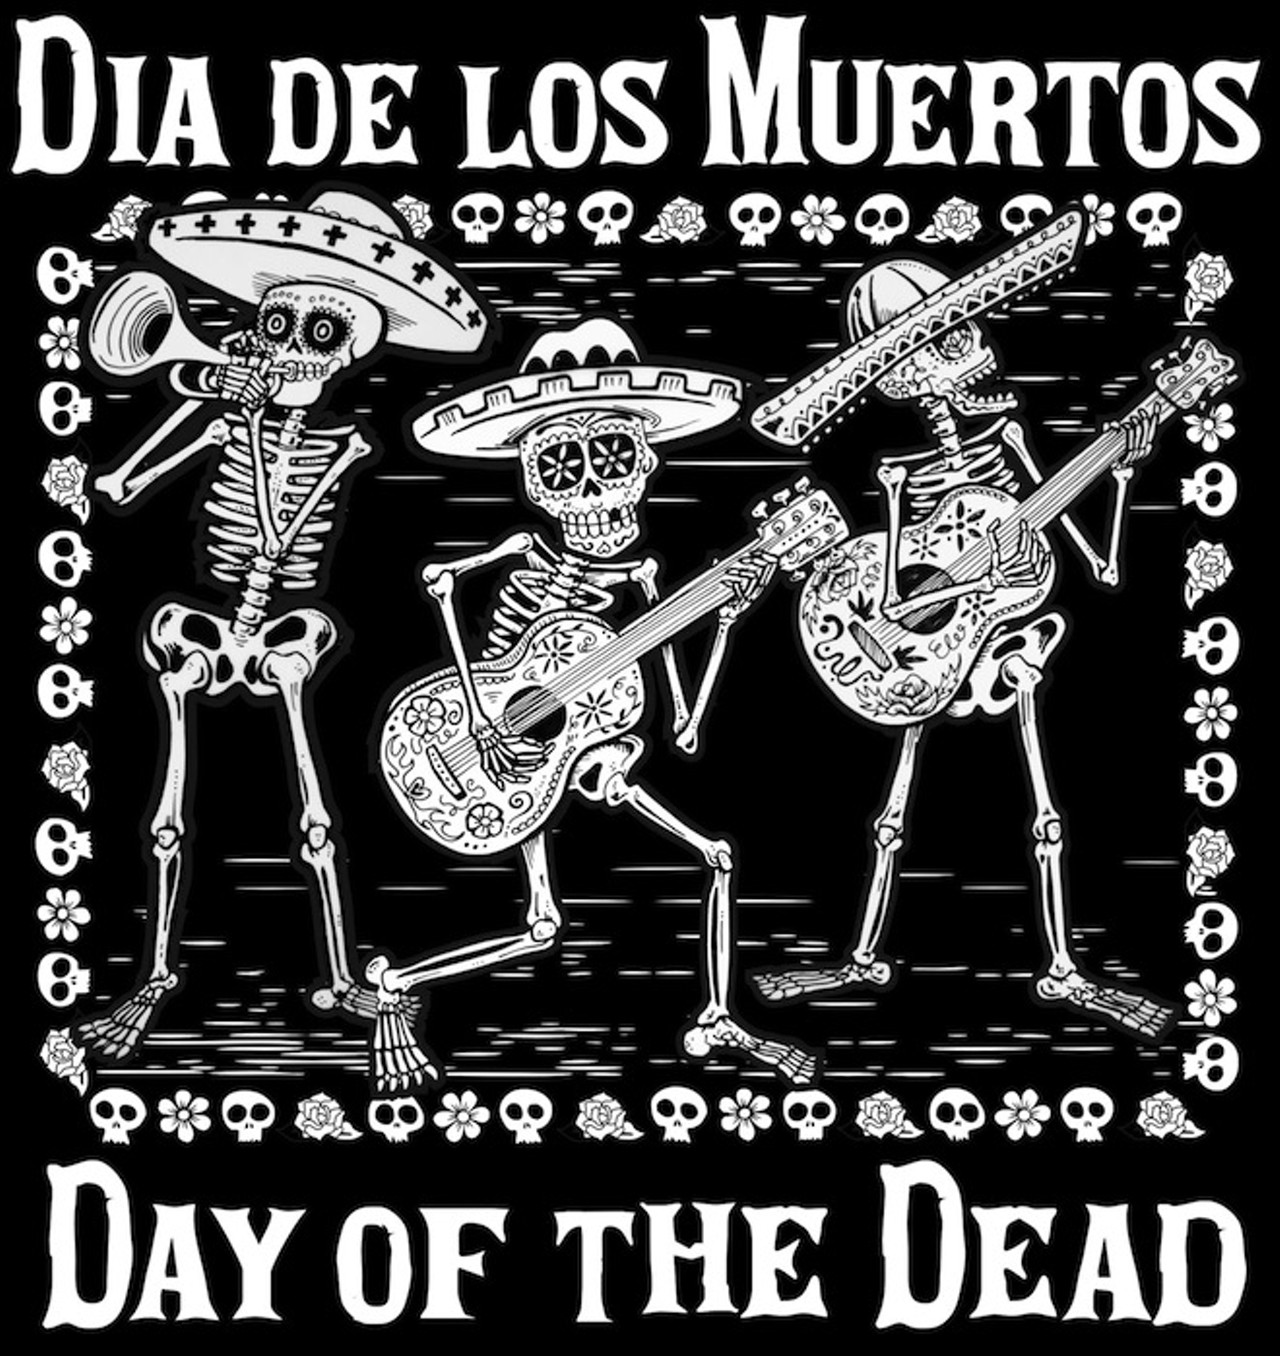 Viva la Vida: A Celebration of Life on the Day of the Dead
Saturday, Nov. 2
7-10 p.m.
Museum of Art &#150; DeLand, 600 N. Woodland Blvd., DeLand
386-734-4371
moartdeland.org
$65
The dead don&#146;t want you to weep and wail or fear their clacking bones; they want you to remember them with joy &#150; music, dancing, plenty of sweets and plenty of calacas &#150; those happy, gaily decorated skeletons you see at Mexican Day of the Dead festivals. The typical American Halloween party tends to focus on the iconography of death in a less thoughtful, more gory way (shambling, blood-spattered zombies covered in open wounds), as opposed to the warm-hearted Mexican Dia de los Muertos, in which all the skeletons are grinning and all the ghosts are your own beloved departed ones. The Museum of Art &#150; DeLand chose to focus on that more convivial kind of celebration with their mercado-themed fundraiser: Mexican beer, margaritas and the Mayan Grill Food Truck will sustain bodies while spirits are raised by roving mariachis, sugar-skull face painters and a Frida Kahlo look-alike contest. &#150; Jessica Bryce Young